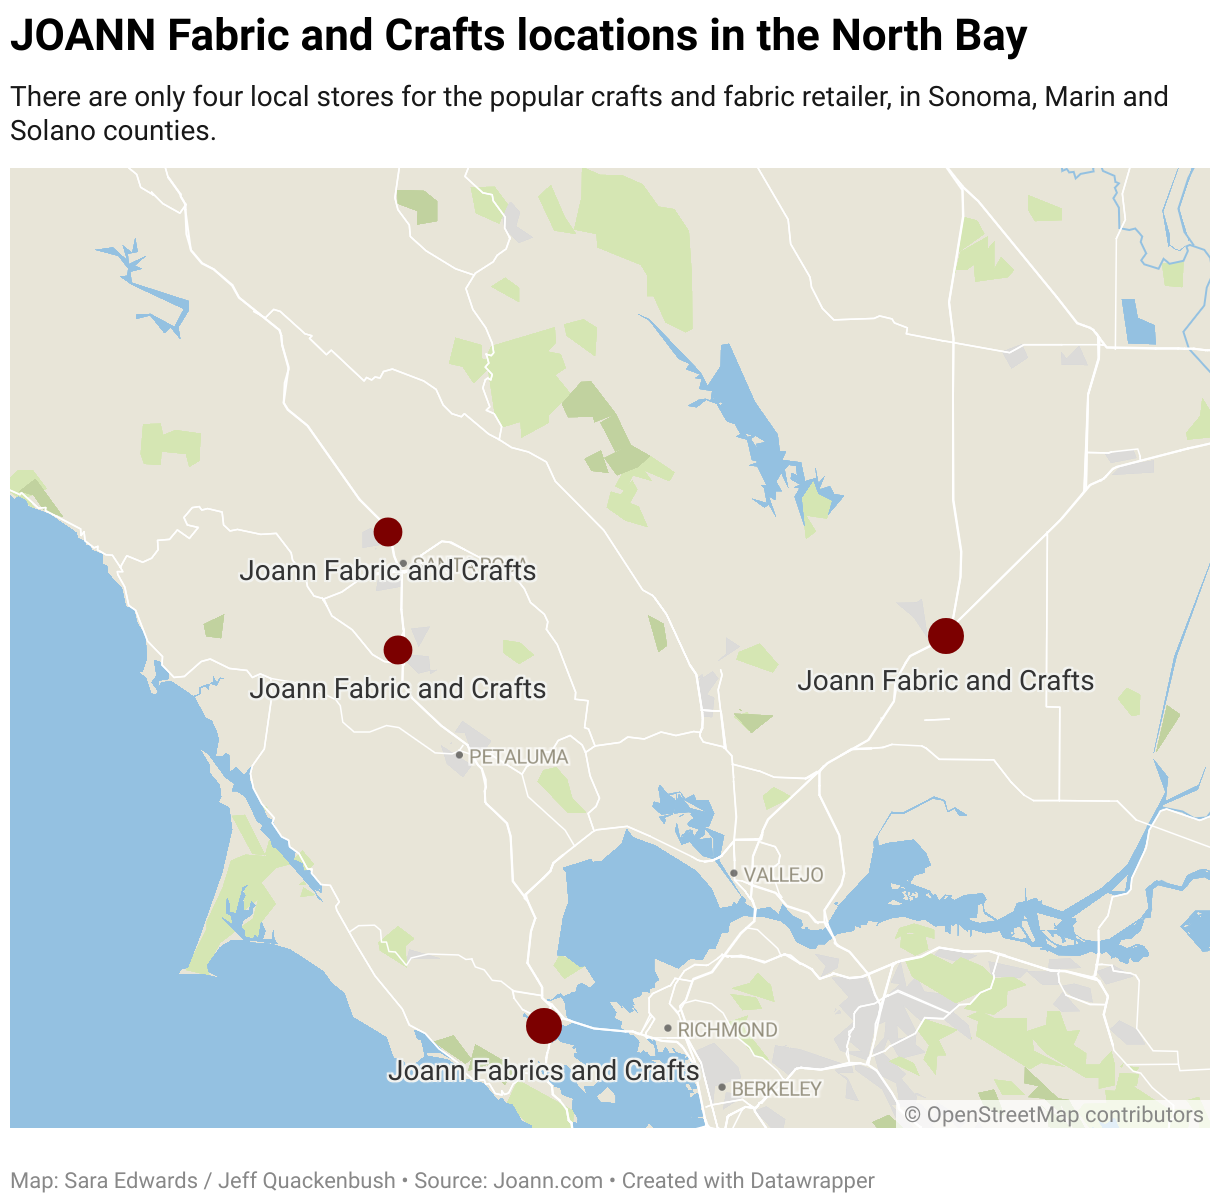 Crafts retailer JOANN files for bankruptcy protections